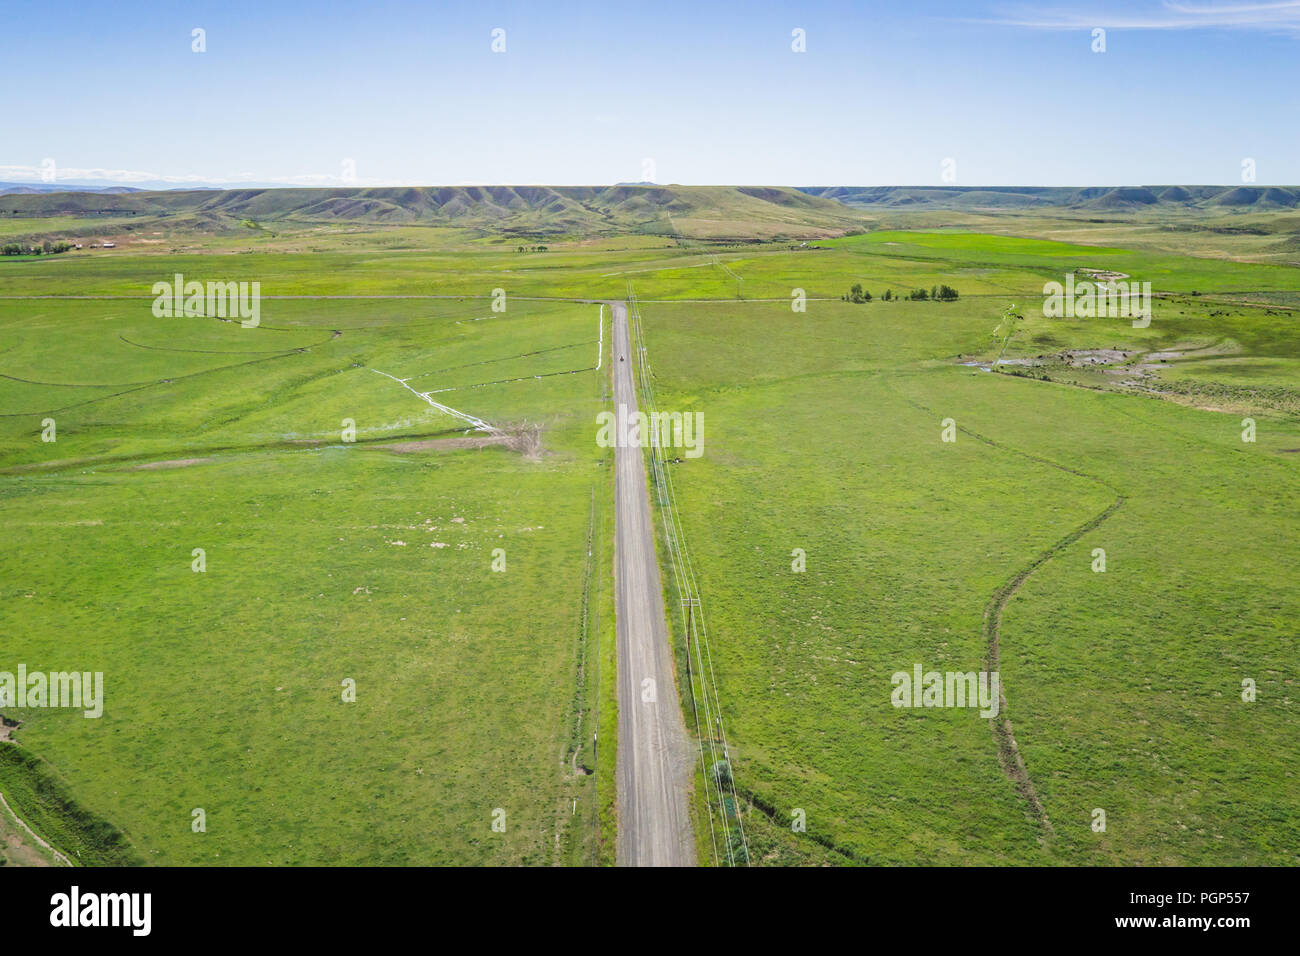 Green farm fields line a gravel road in the flat lands of America's great plains. Stock Photo